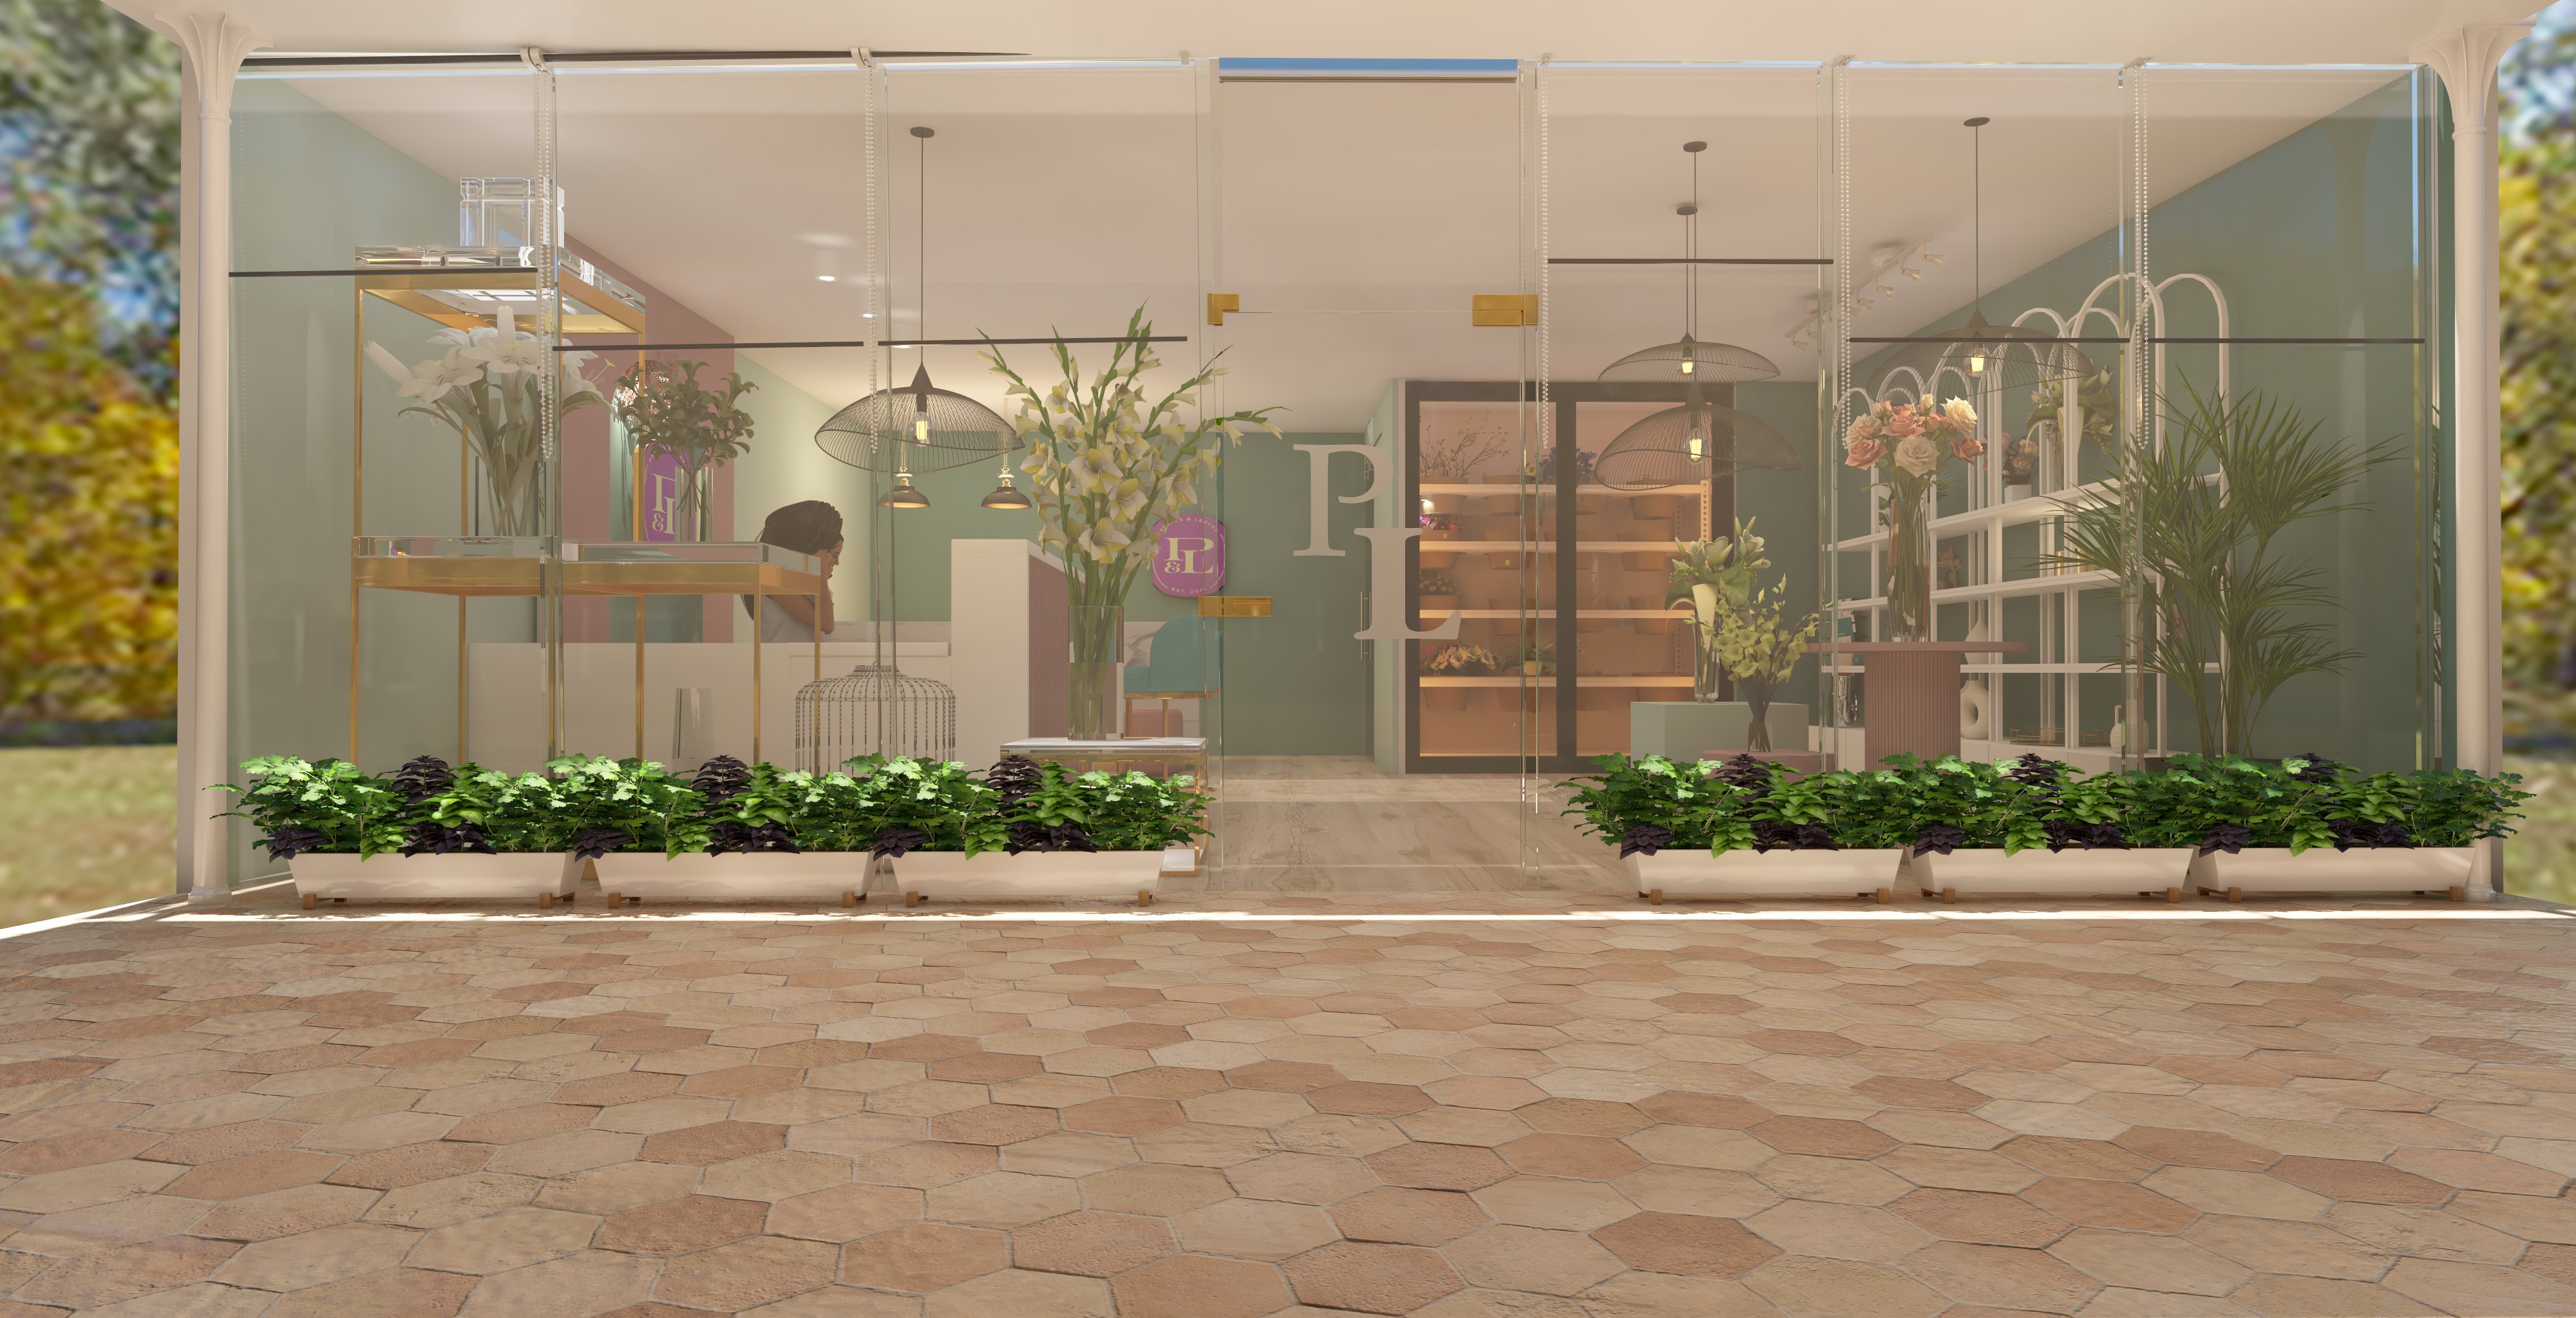 Petals and Leaves Flower Shop Design by Engy Samir Designss